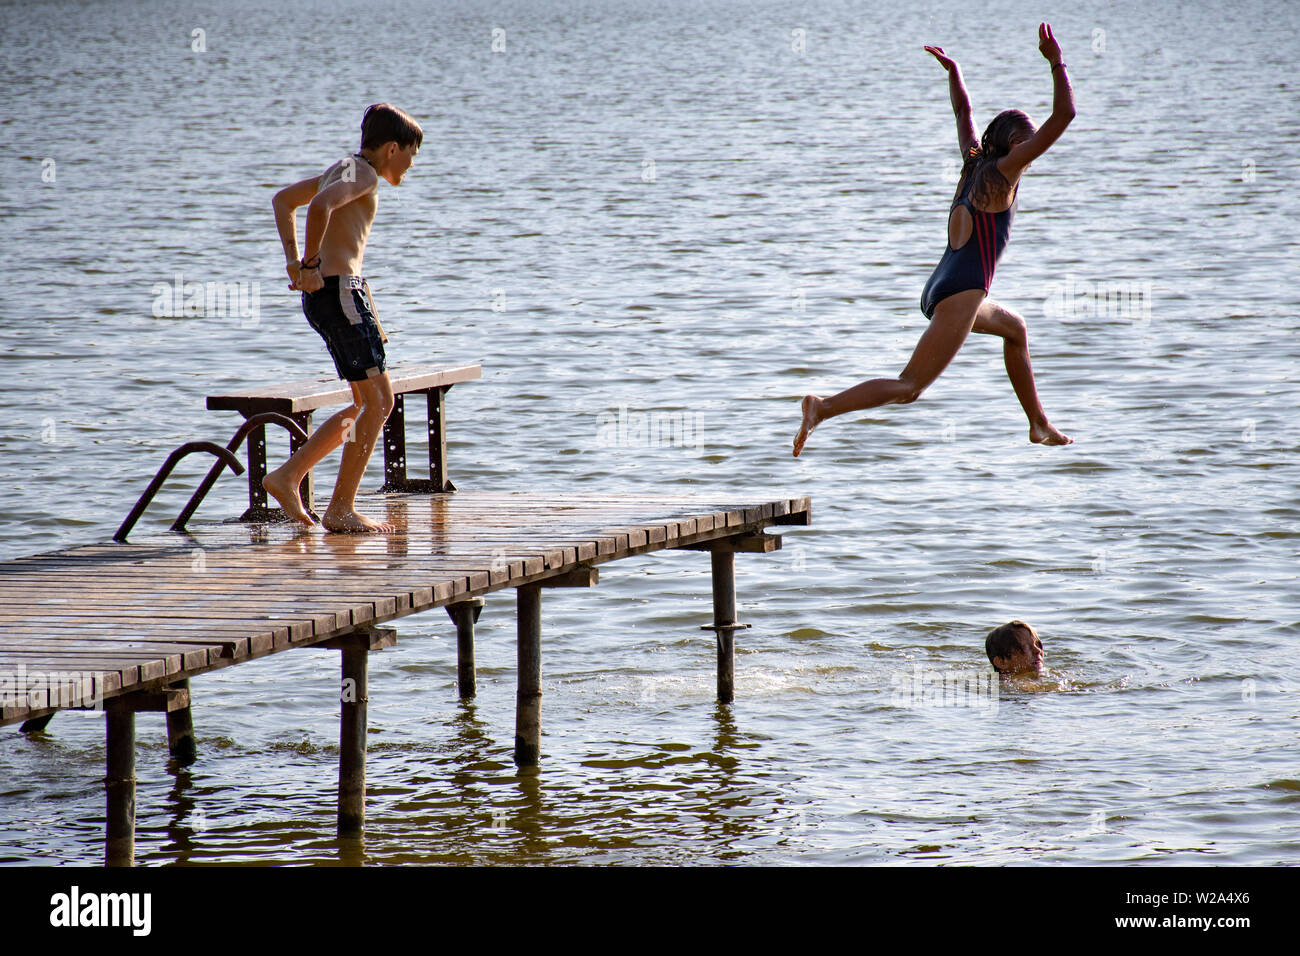 Vilnius / Lithuania - July 1 2019: Children on a pier in summer, diving and having fun together Stock Photo